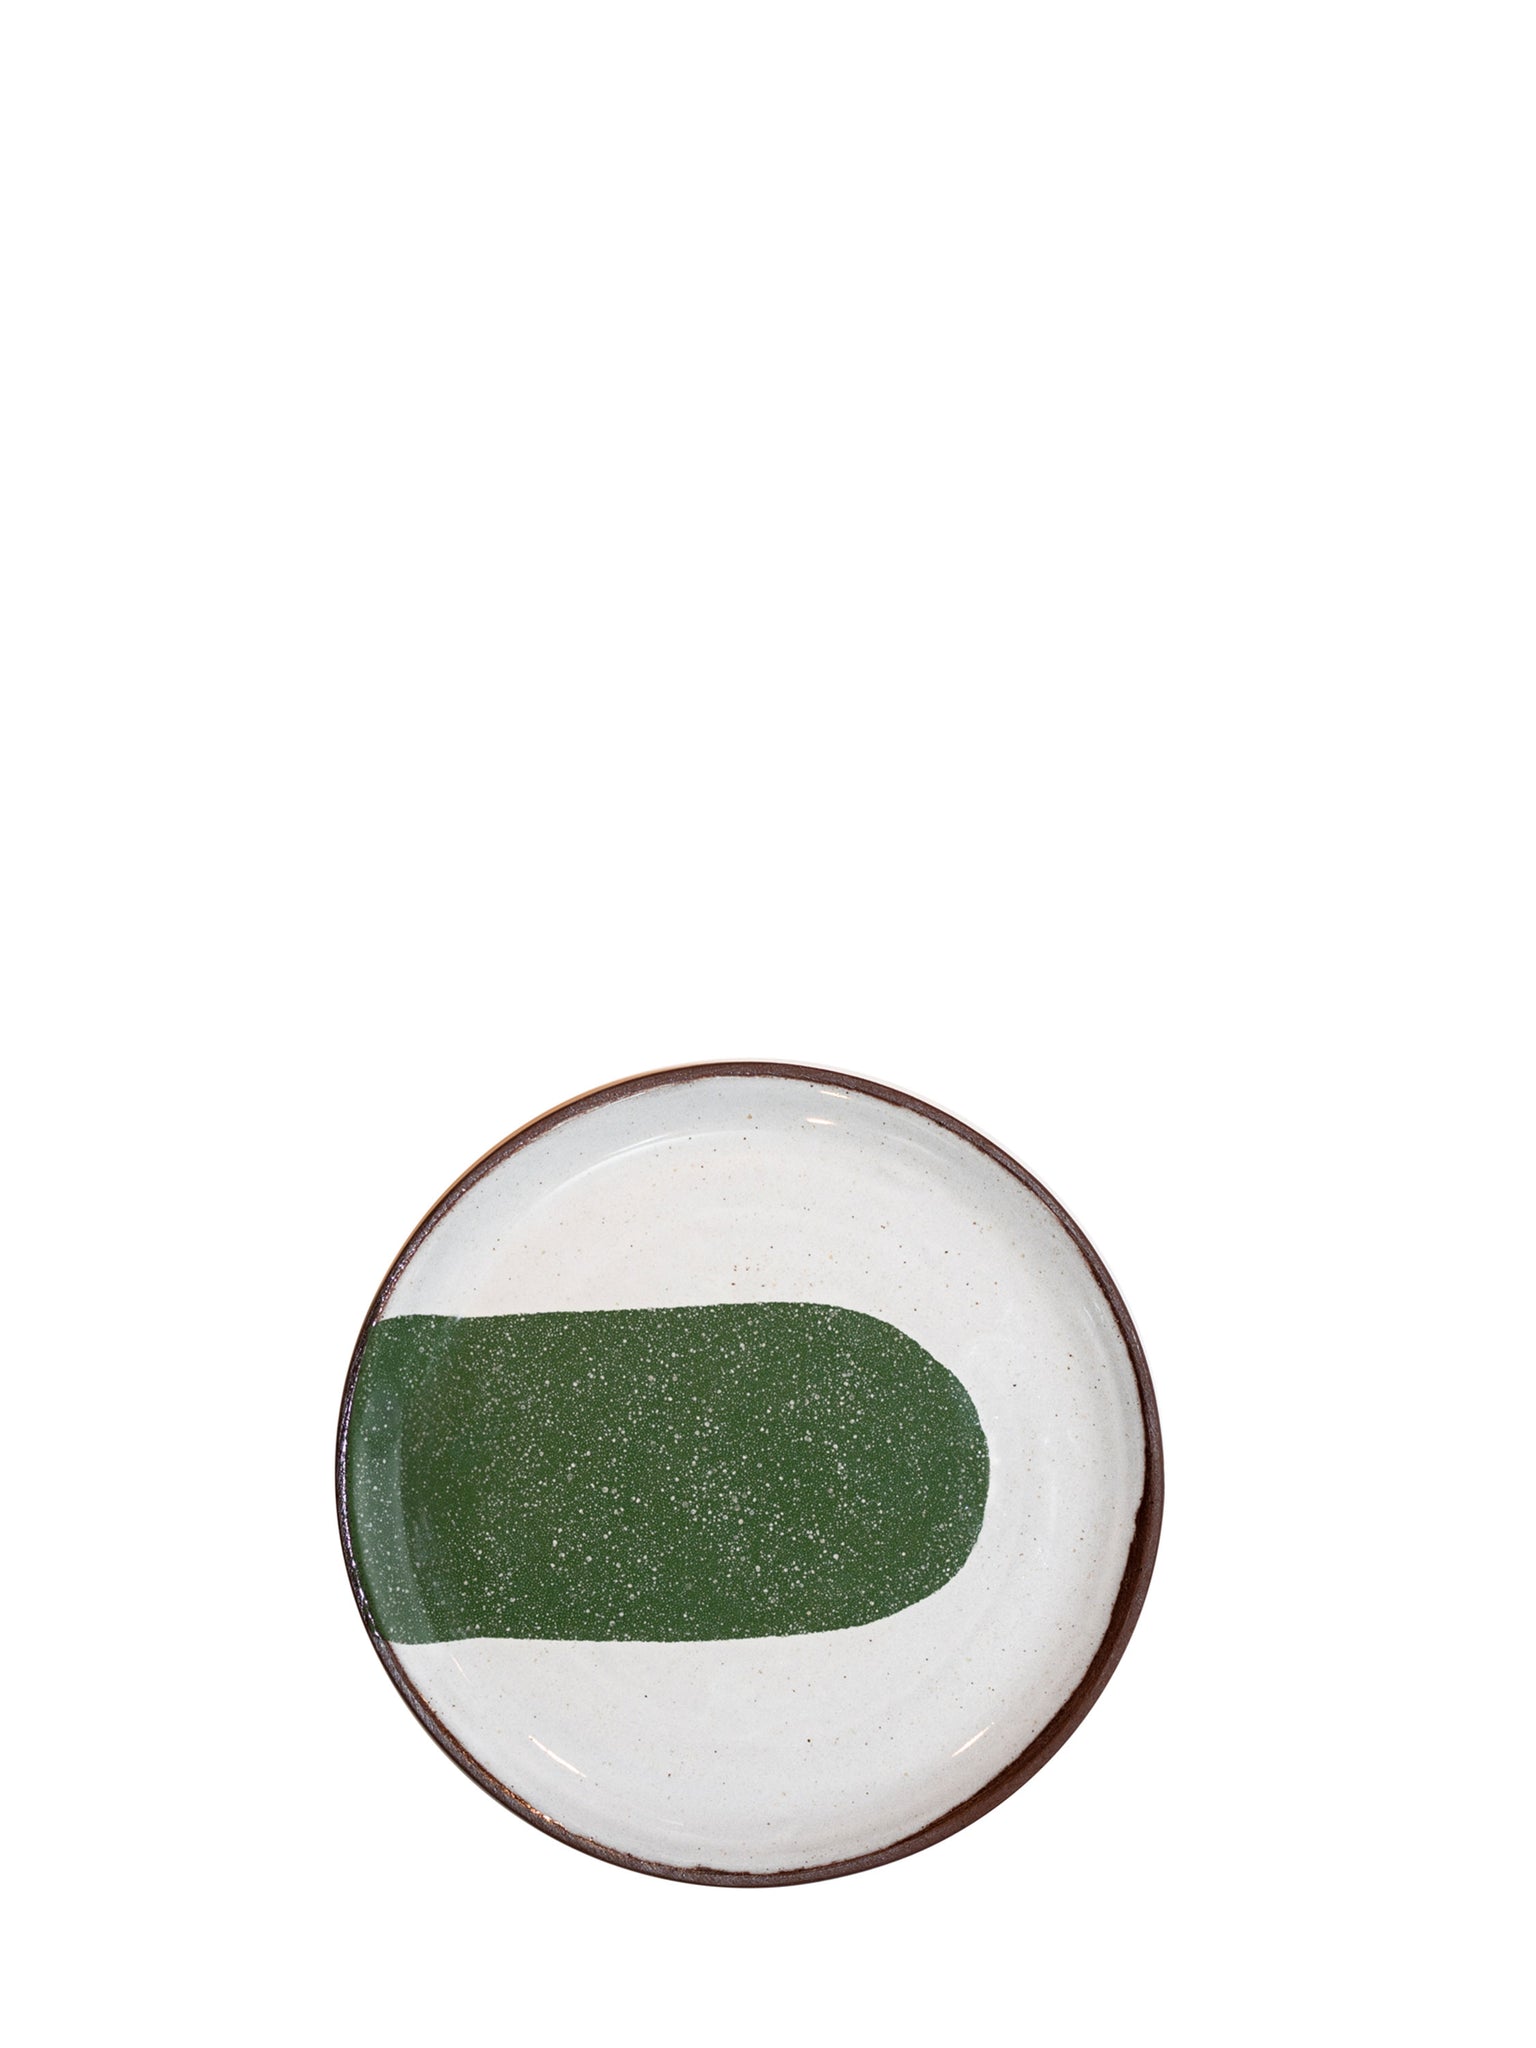 Silvia K handmade terracotta small plate with white and green decor